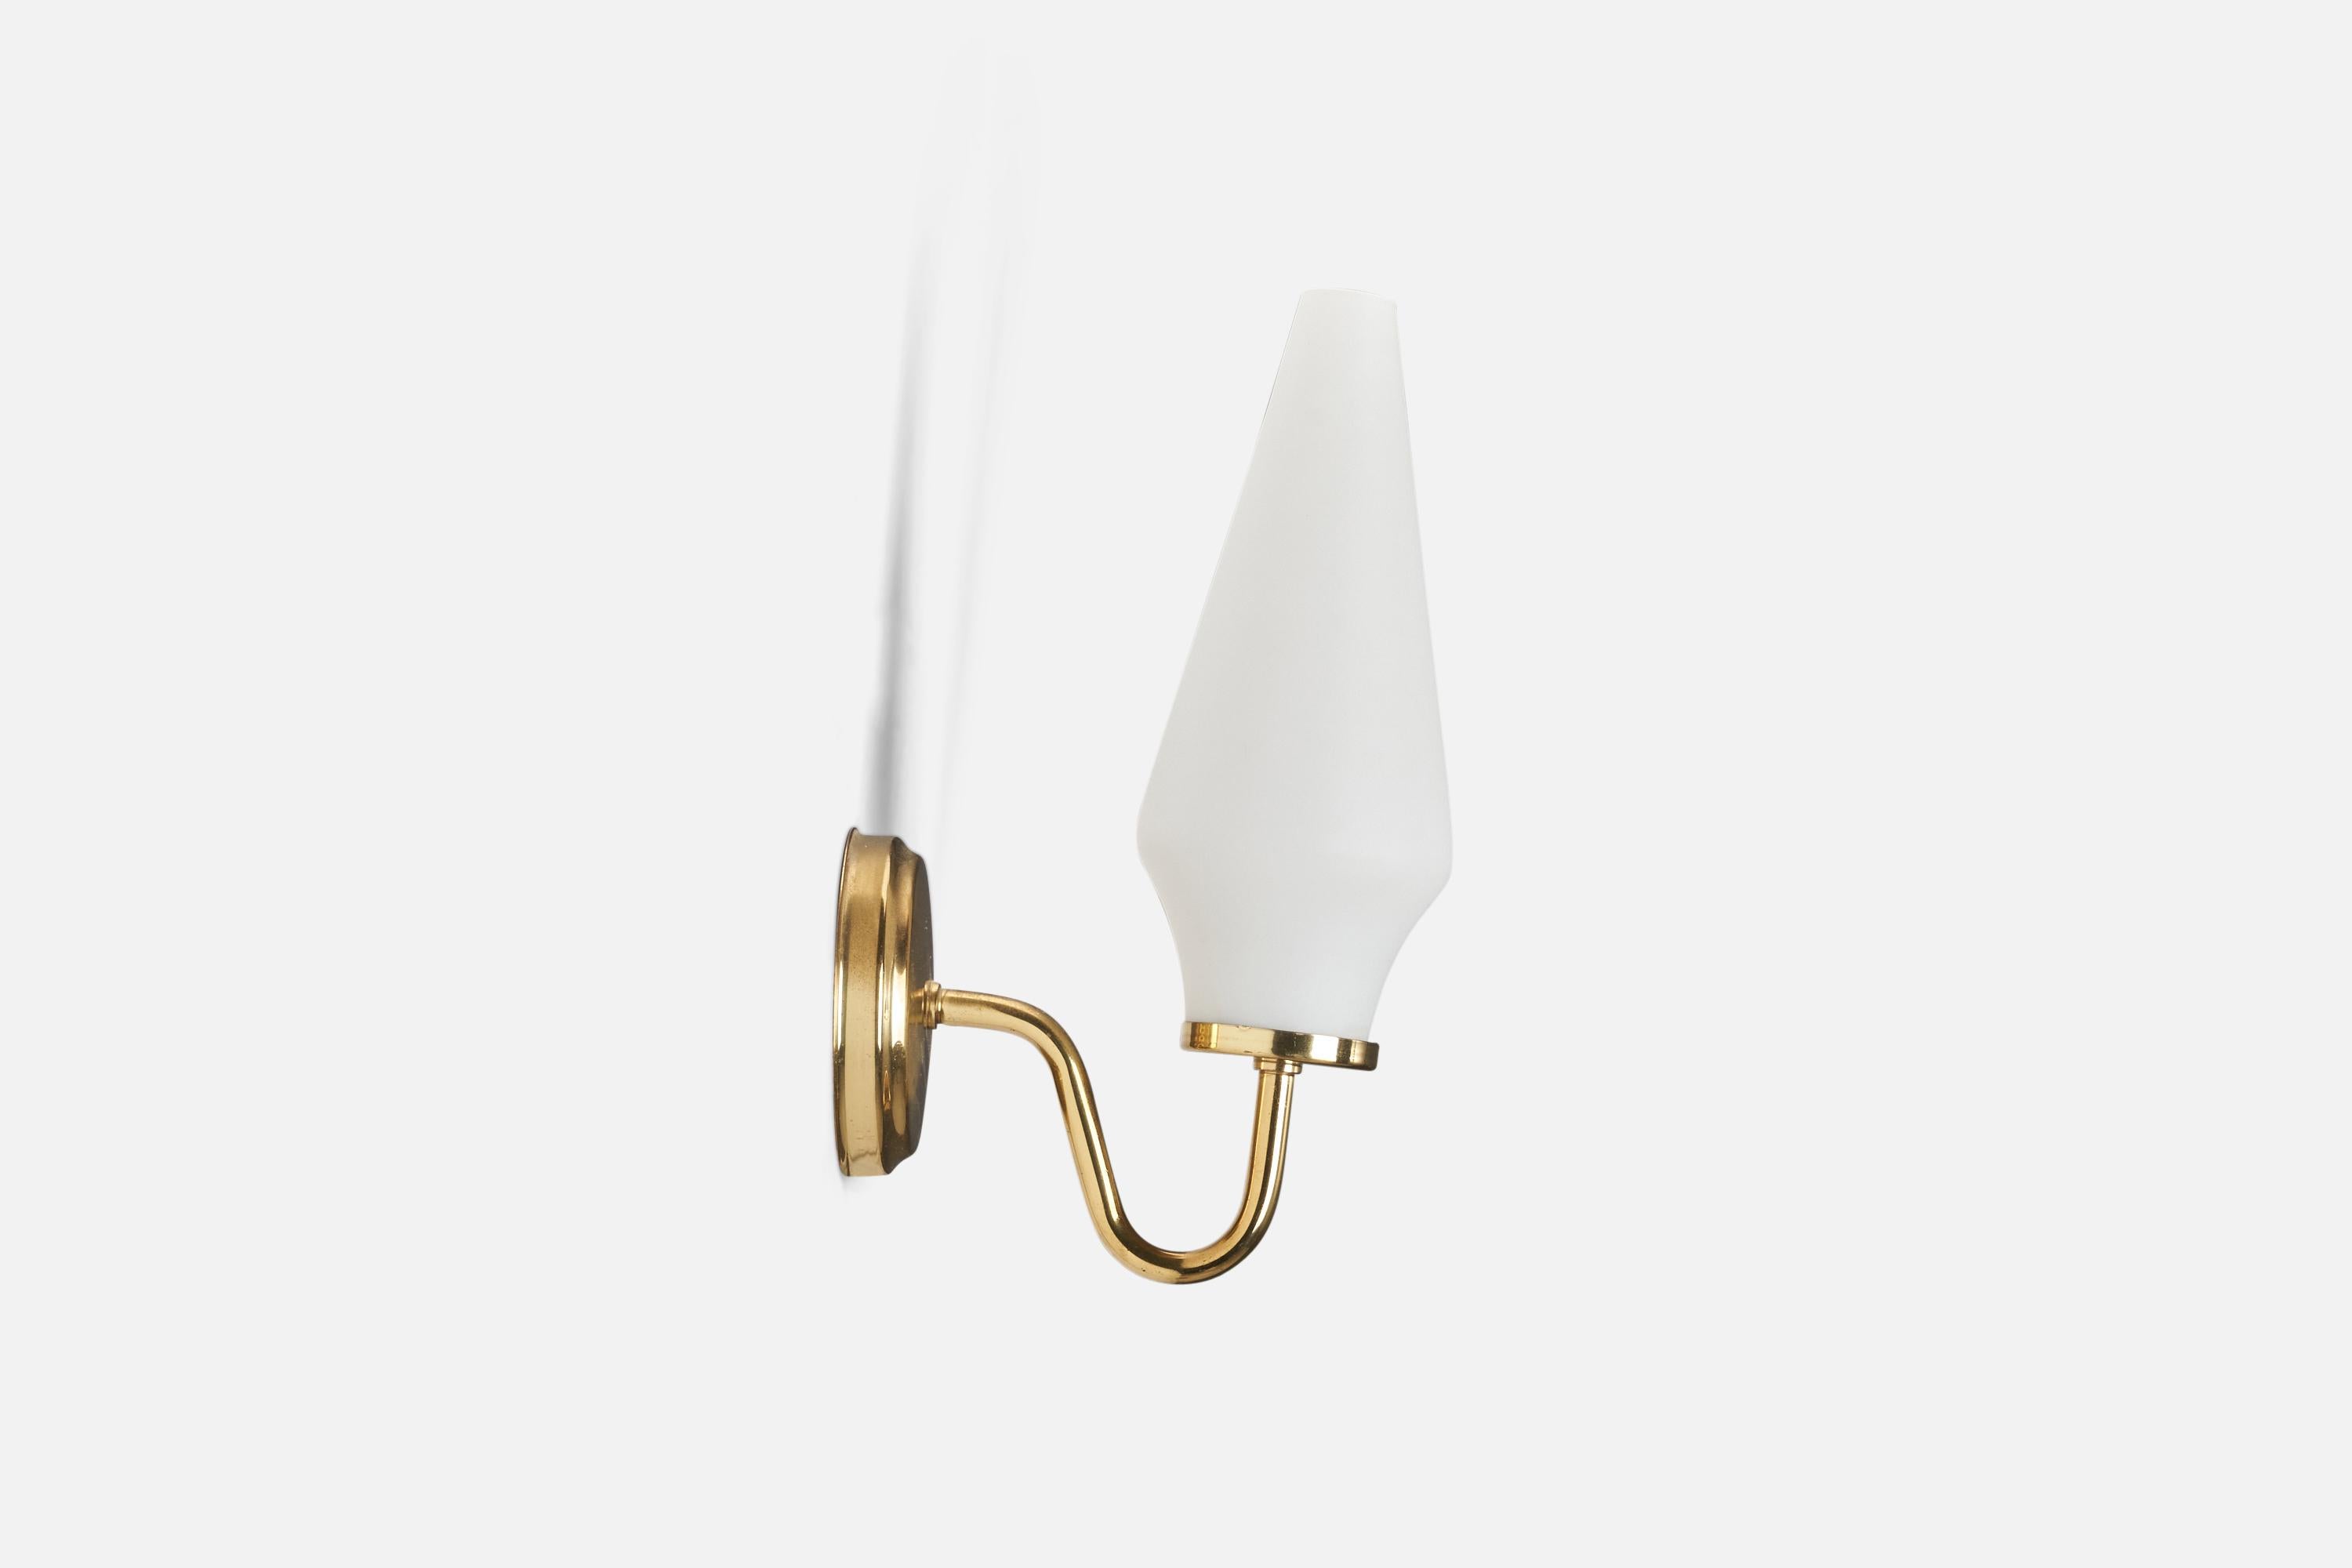 A pair of brass, milk glass wall lights designed and produced by a Swedish Designer, Sweden, 1970s.

Dimensions of Back Plate (inches) : 3.7 x 3.7 x 0.8 (Height x Width x Depth)

Sockets take E-14 bulbs.

There is no maximum wattage stated on